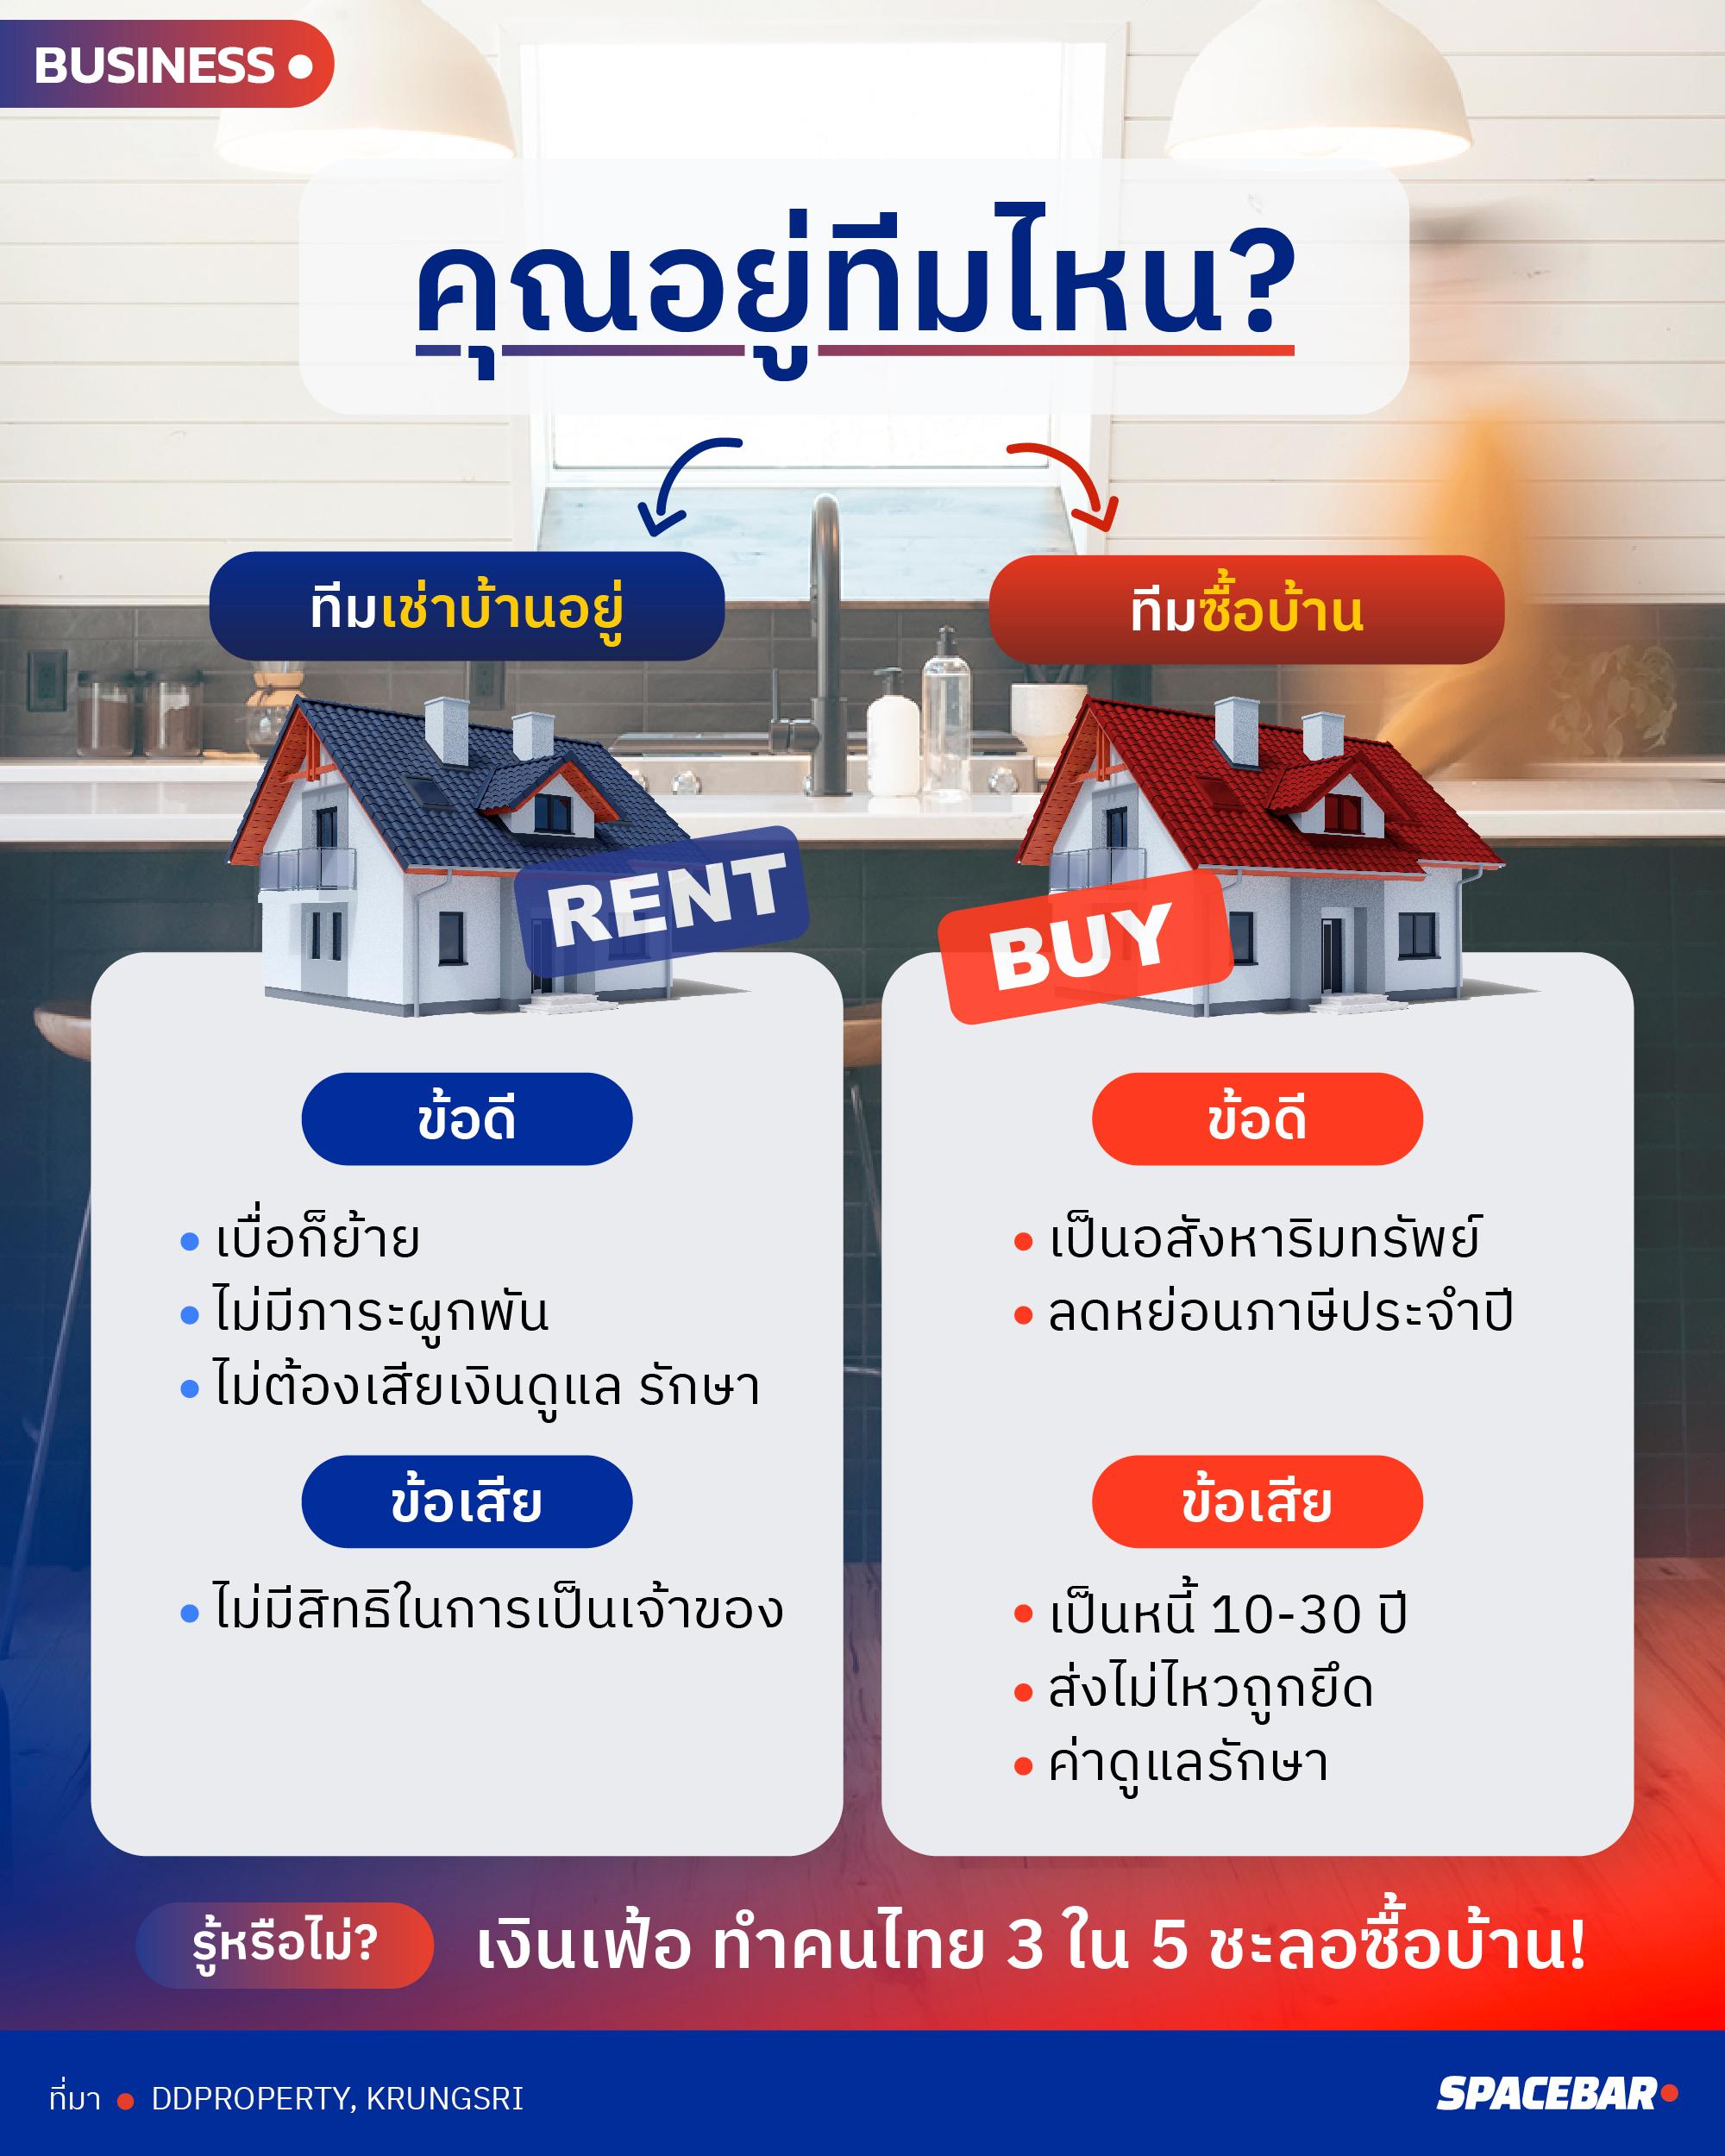 Economy-Borrowing-money-buy-house-or-renting-which-better.jpg